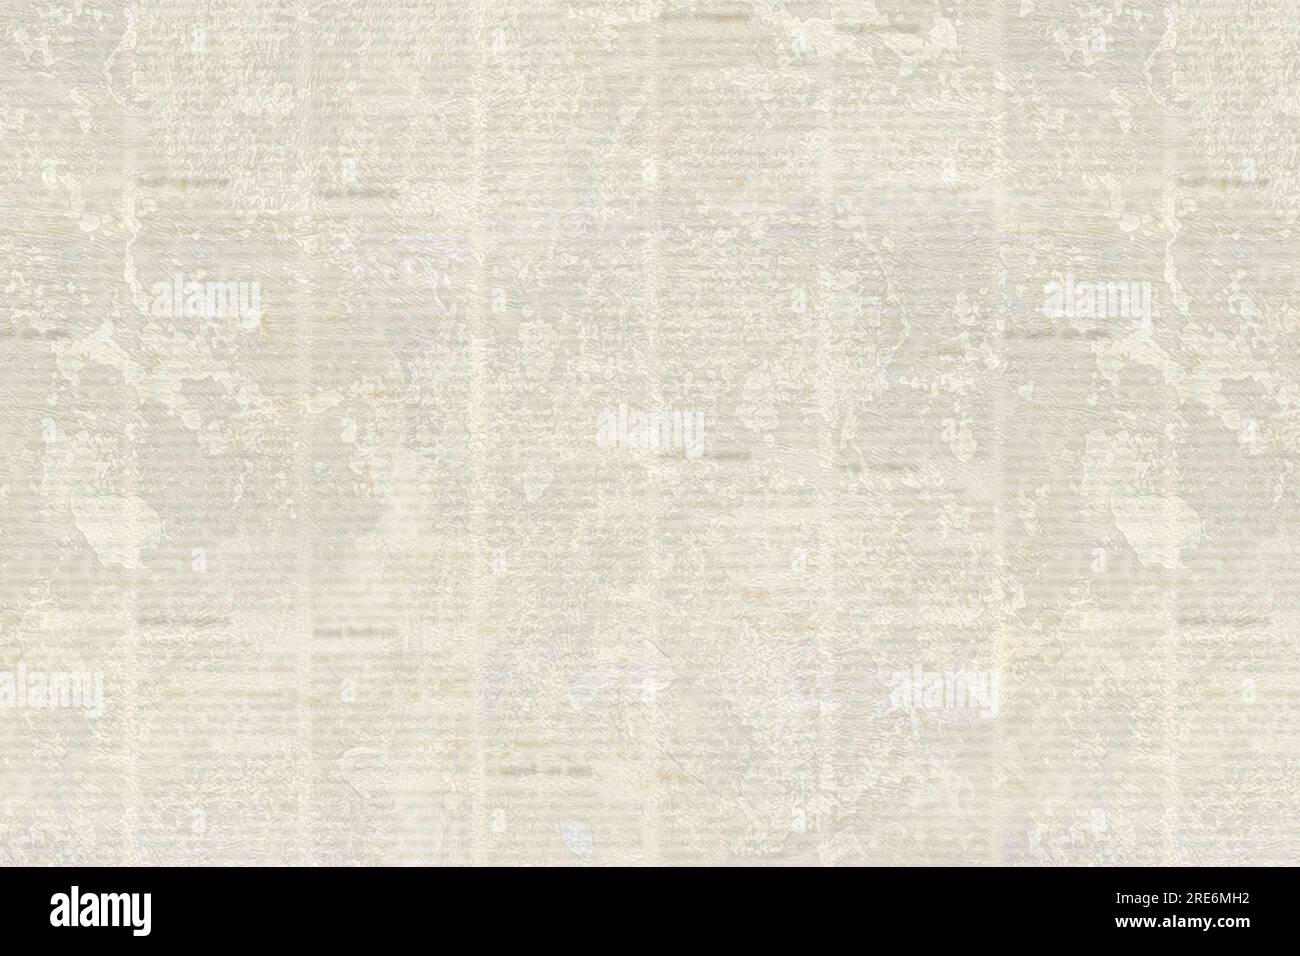 Old Vintage Grunge Newspaper Paper Texture Background Stock Photo -  Download Image Now - iStock